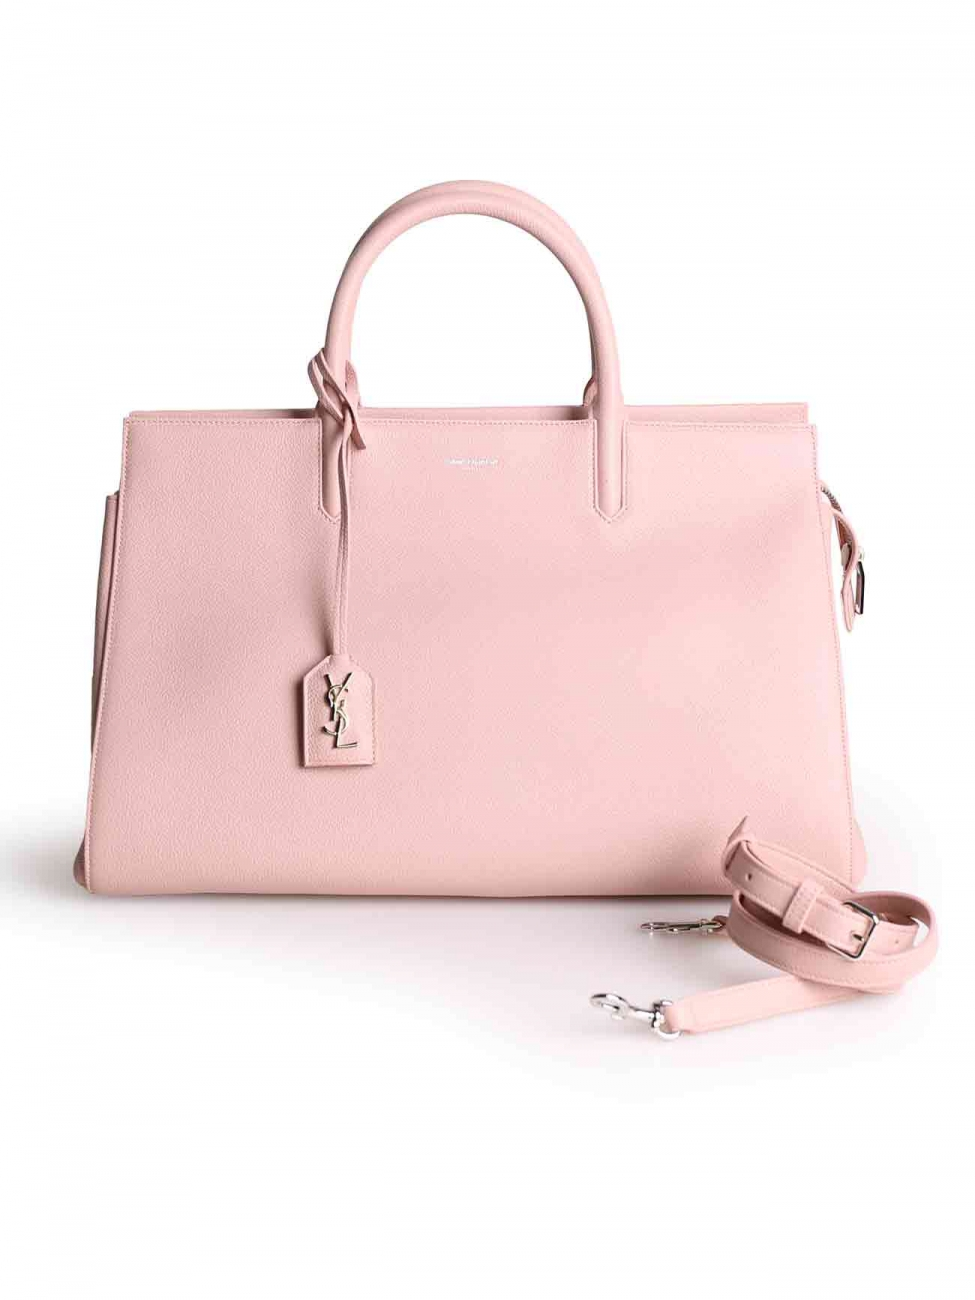 Saint laurent Cabas Rive Gauche Leather Tote in Pink | Lyst